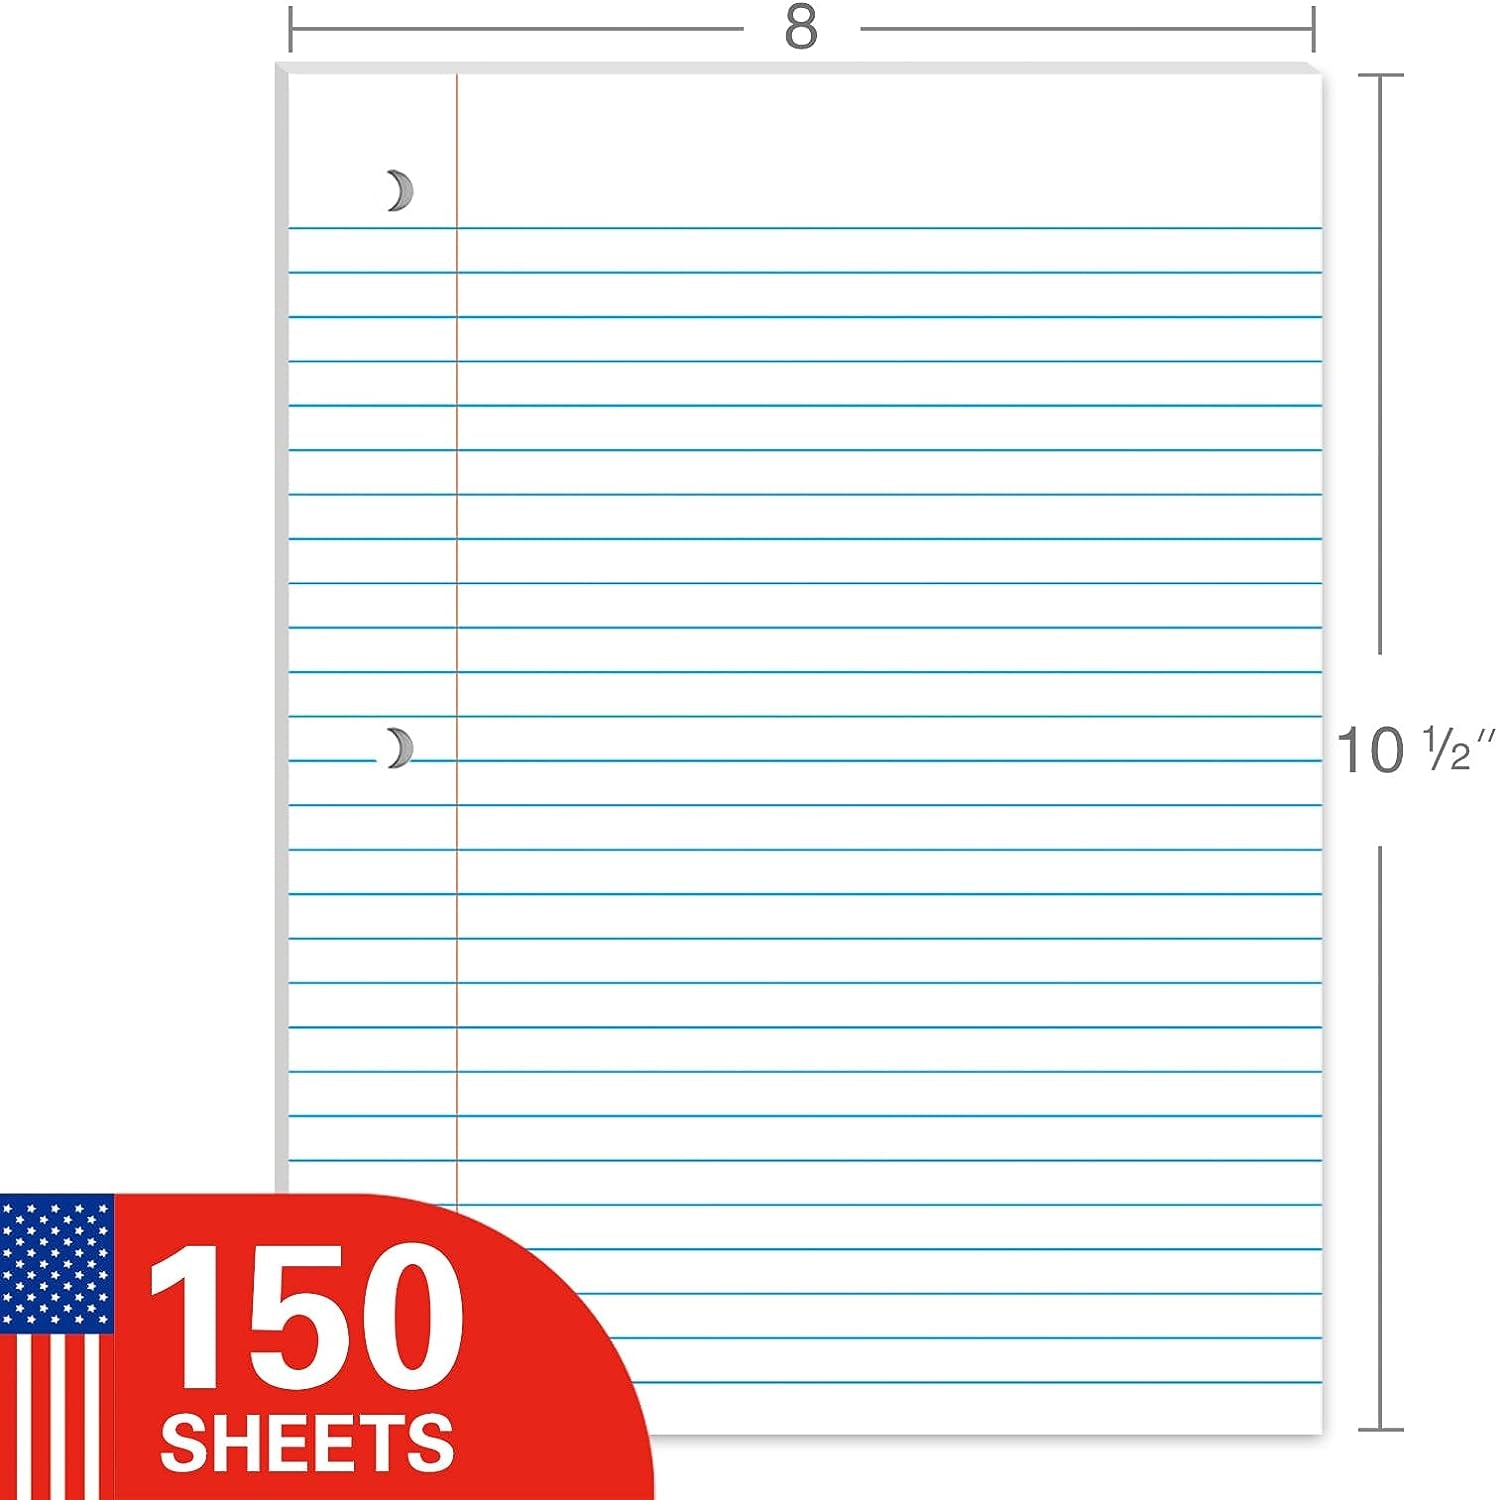 Notebook Paper Loose Leaf Paper, Standard 8"X10-1/2" Wide Ruled Filler Paper,3 Hole Punched Binder Paper for 3 Ring Binder,150 Sheets/Pack, 4 Pack White (F60001W)